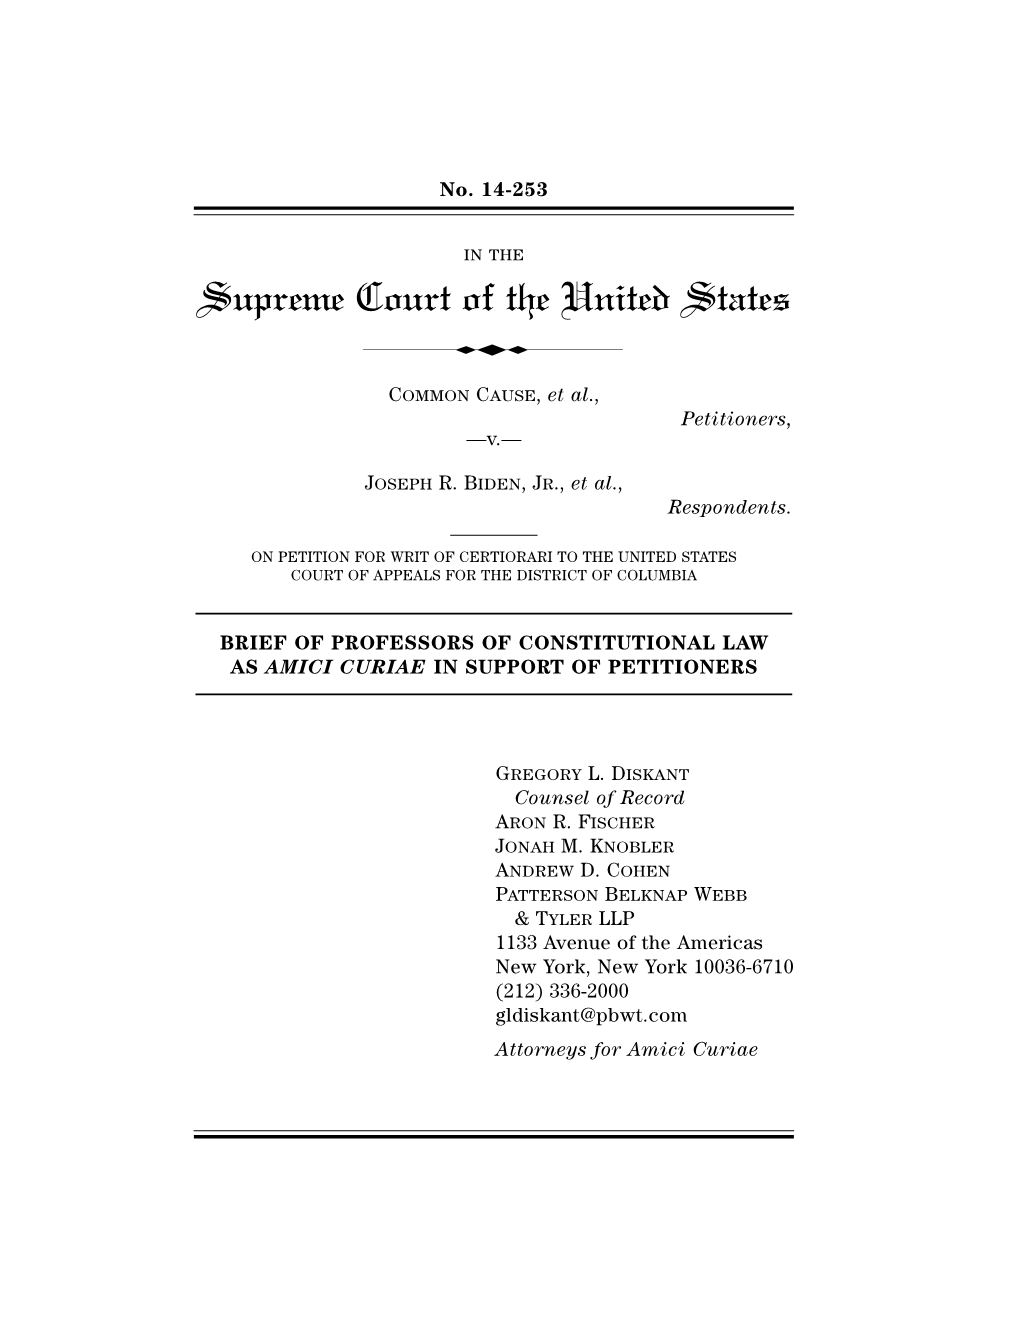 Amicus Brief of Constitutional Law Professors in Support of Common